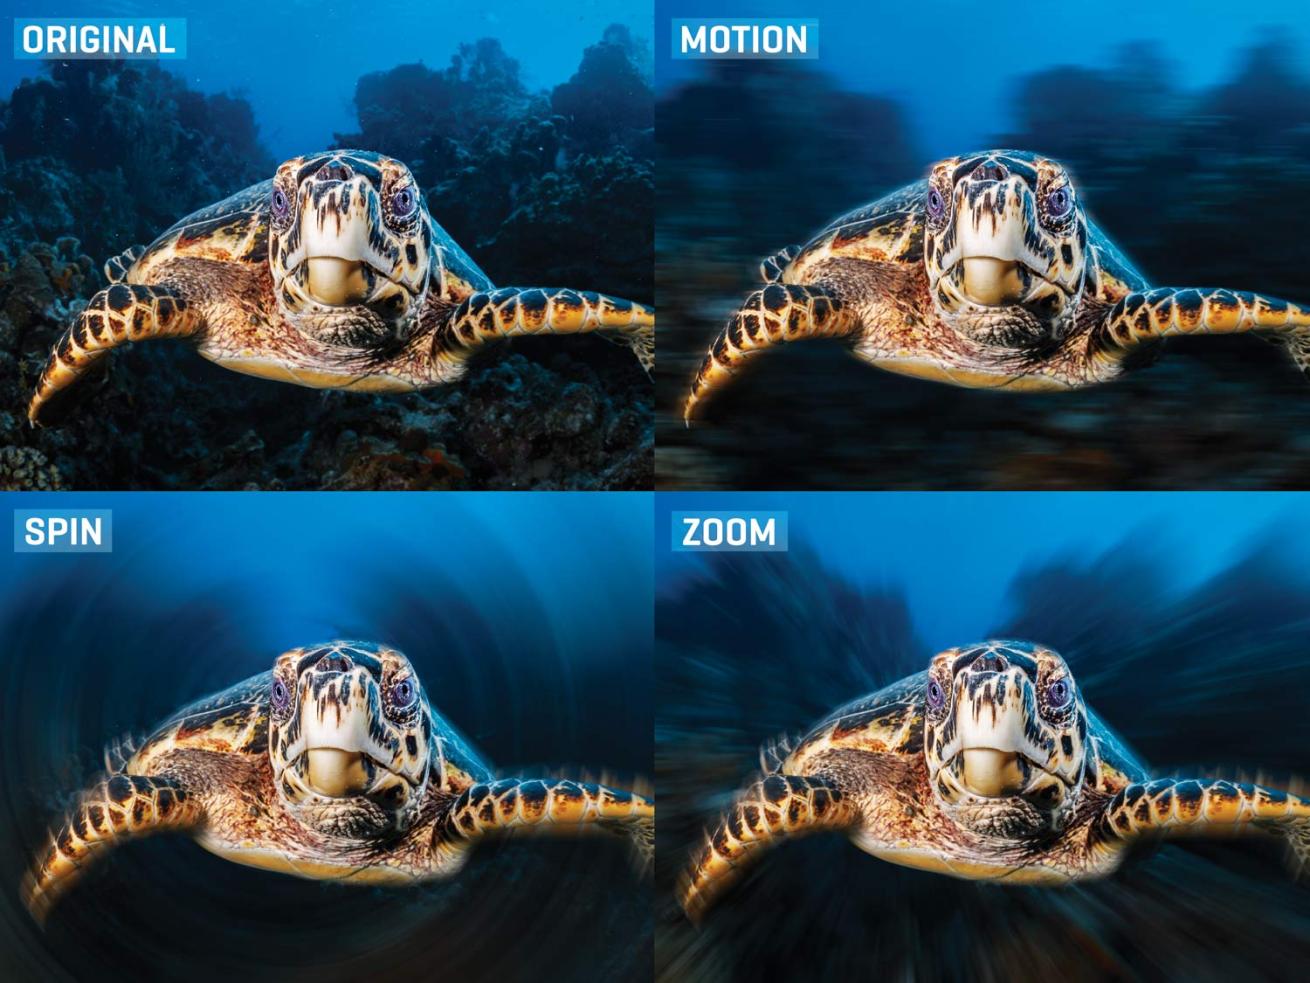 Motion, Spin and Zoom blur examples